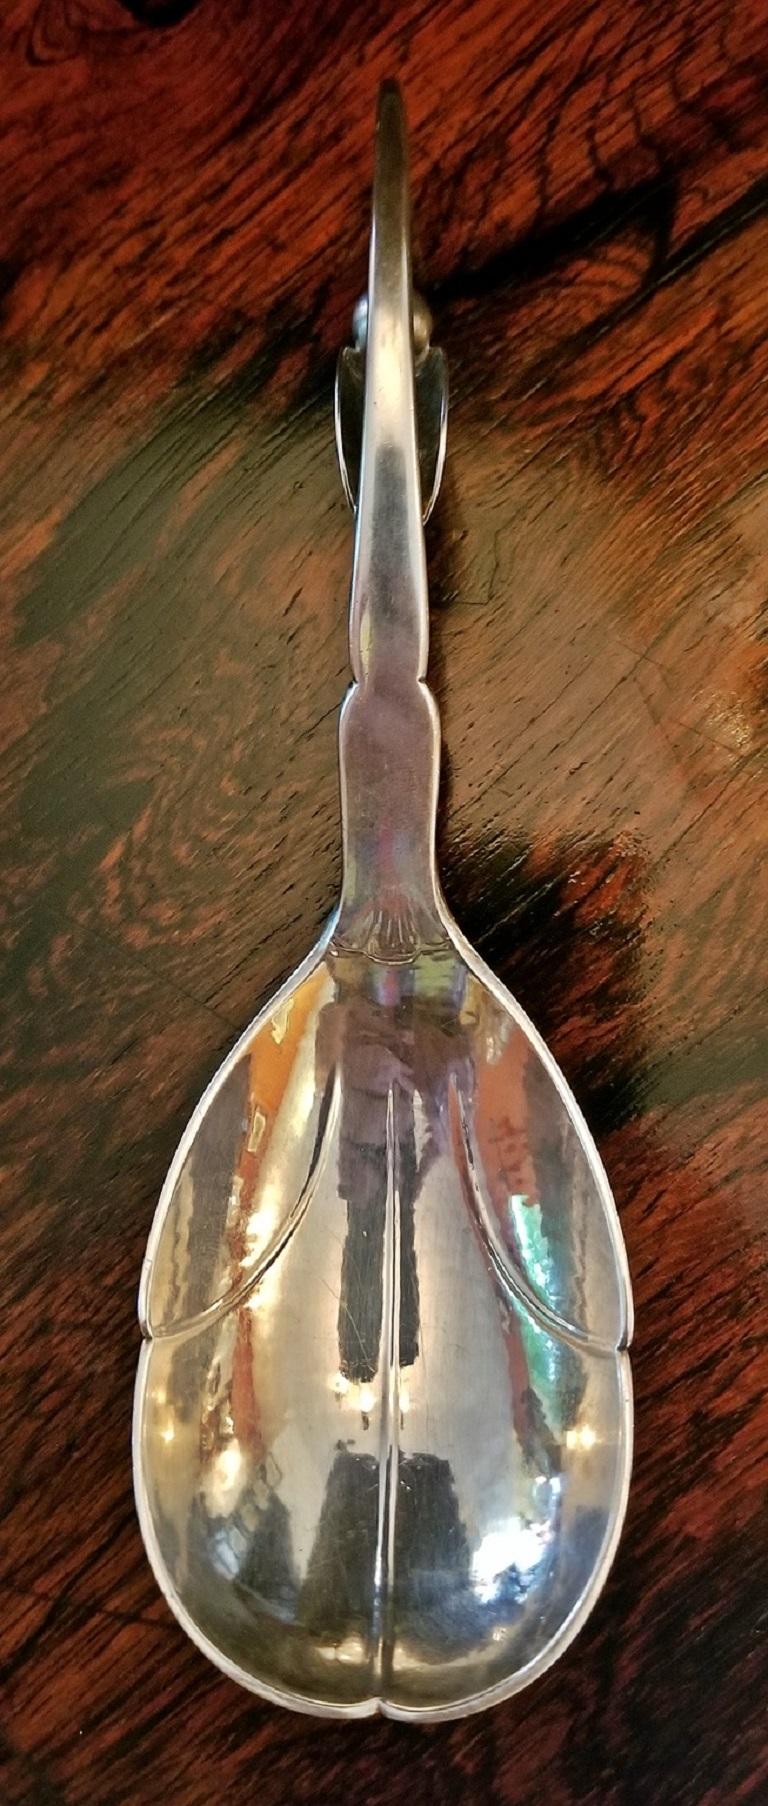 Beautifully cast sterling silver caddy spoon or sometimes referred to as a berry spoon, by the World Renowned Danish Silversmith….Georg Jensen.

Pattern No. 21…..but much larger than other similar pieces that have appeared for sale. Very Art Deco